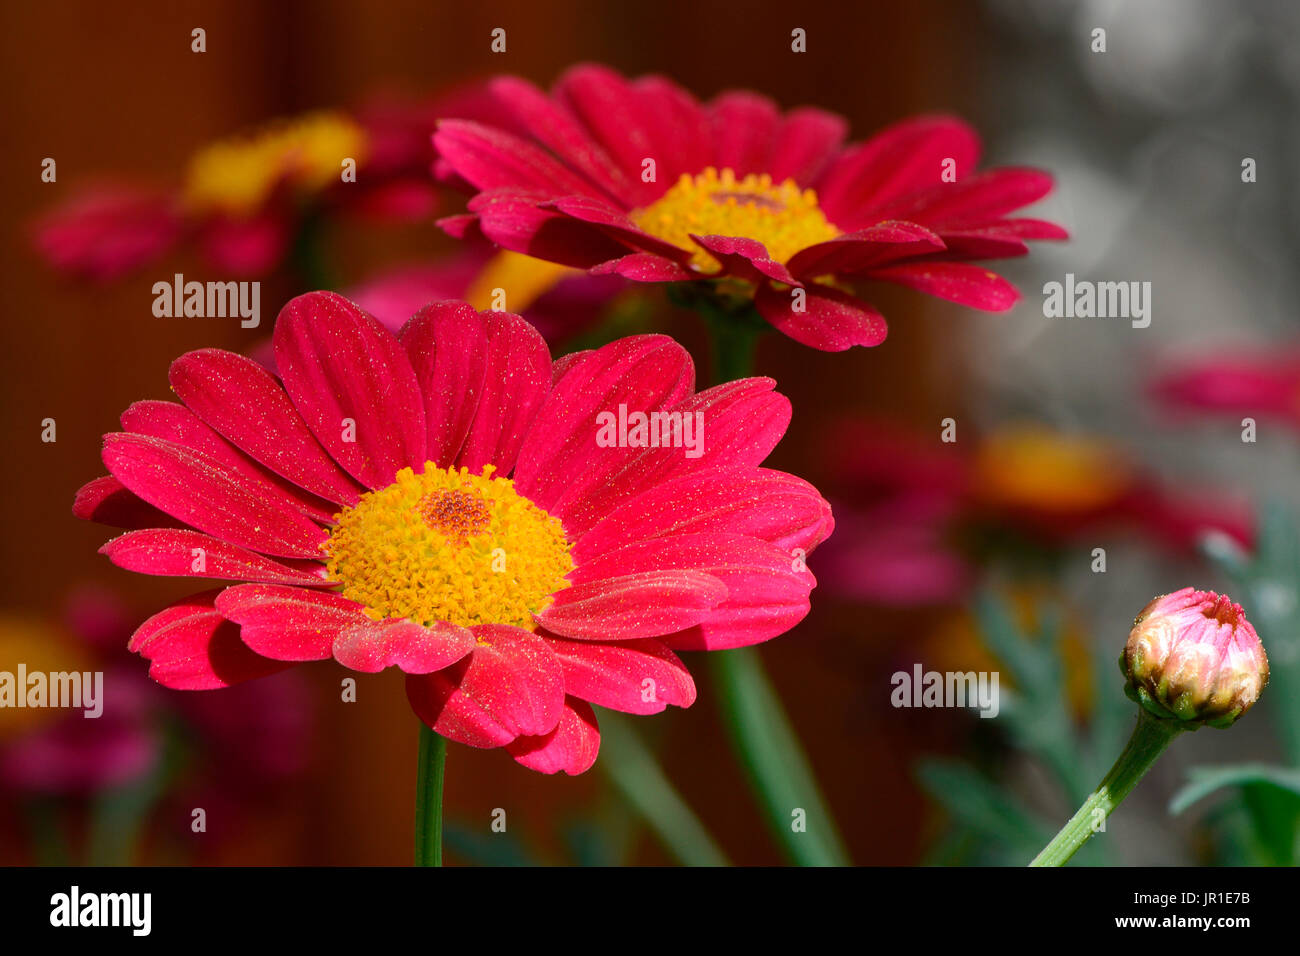 Horticultural Daisies flowers Stock Photo